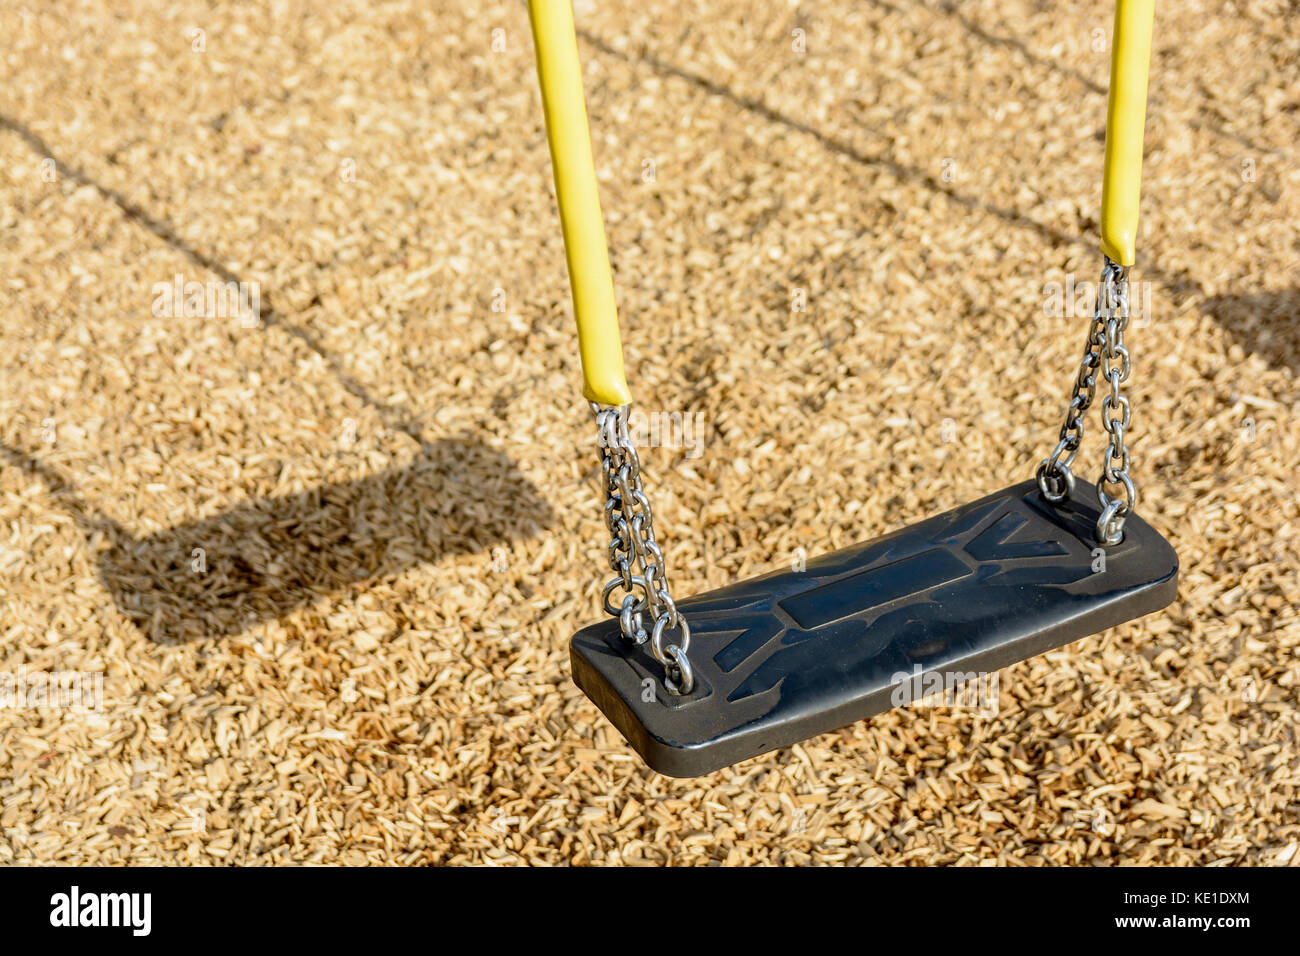 A still child's swing in black plastic in a wood chips covered playground with chrome chains in a yellow plastic sleeve and drop shadow. Stock Photo